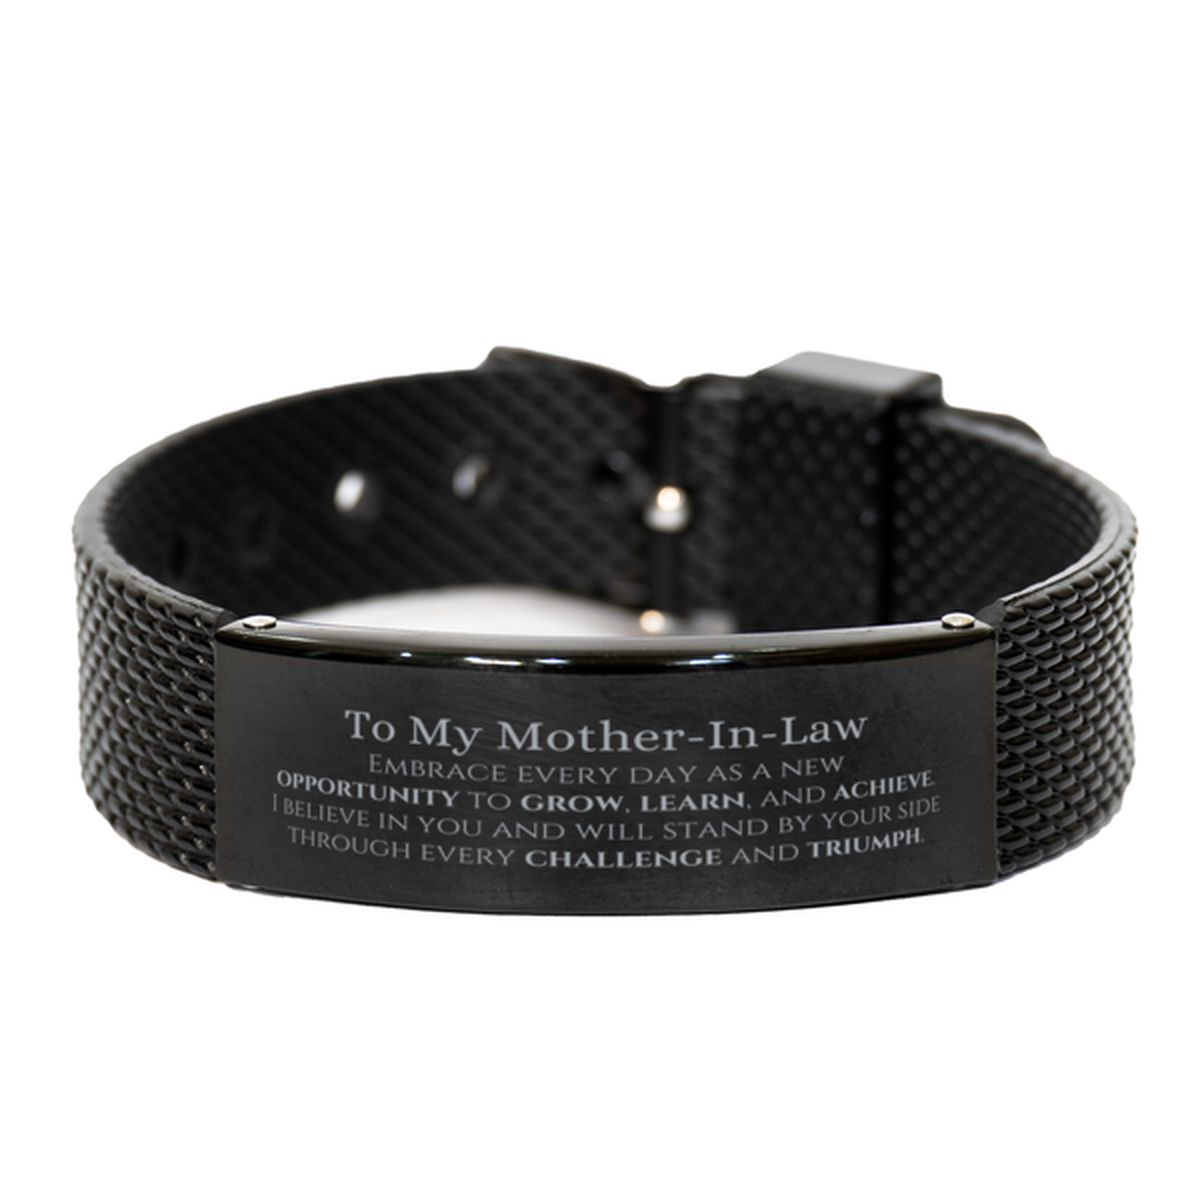 To My Mother-In-Law Gifts, I believe in you and will stand by your side, Inspirational Black Shark Mesh Bracelet For Mother-In-Law, Birthday Christmas Motivational Mother-In-Law Gifts